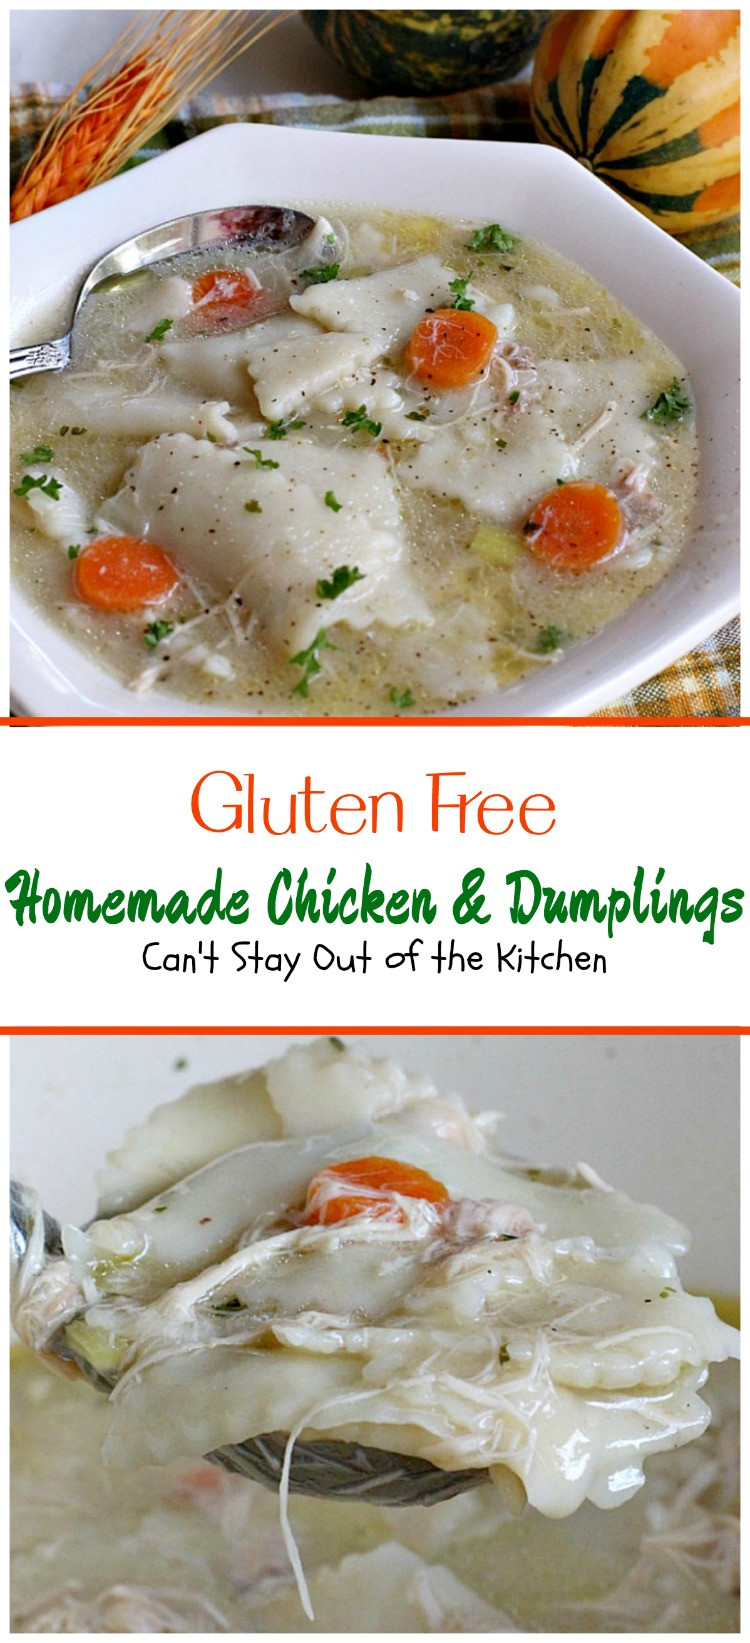 Bob'S Red Mill Gluten Free Chicken And Dumplings
 Homemade Chicken and Dumplings Can t Stay Out of the Kitchen